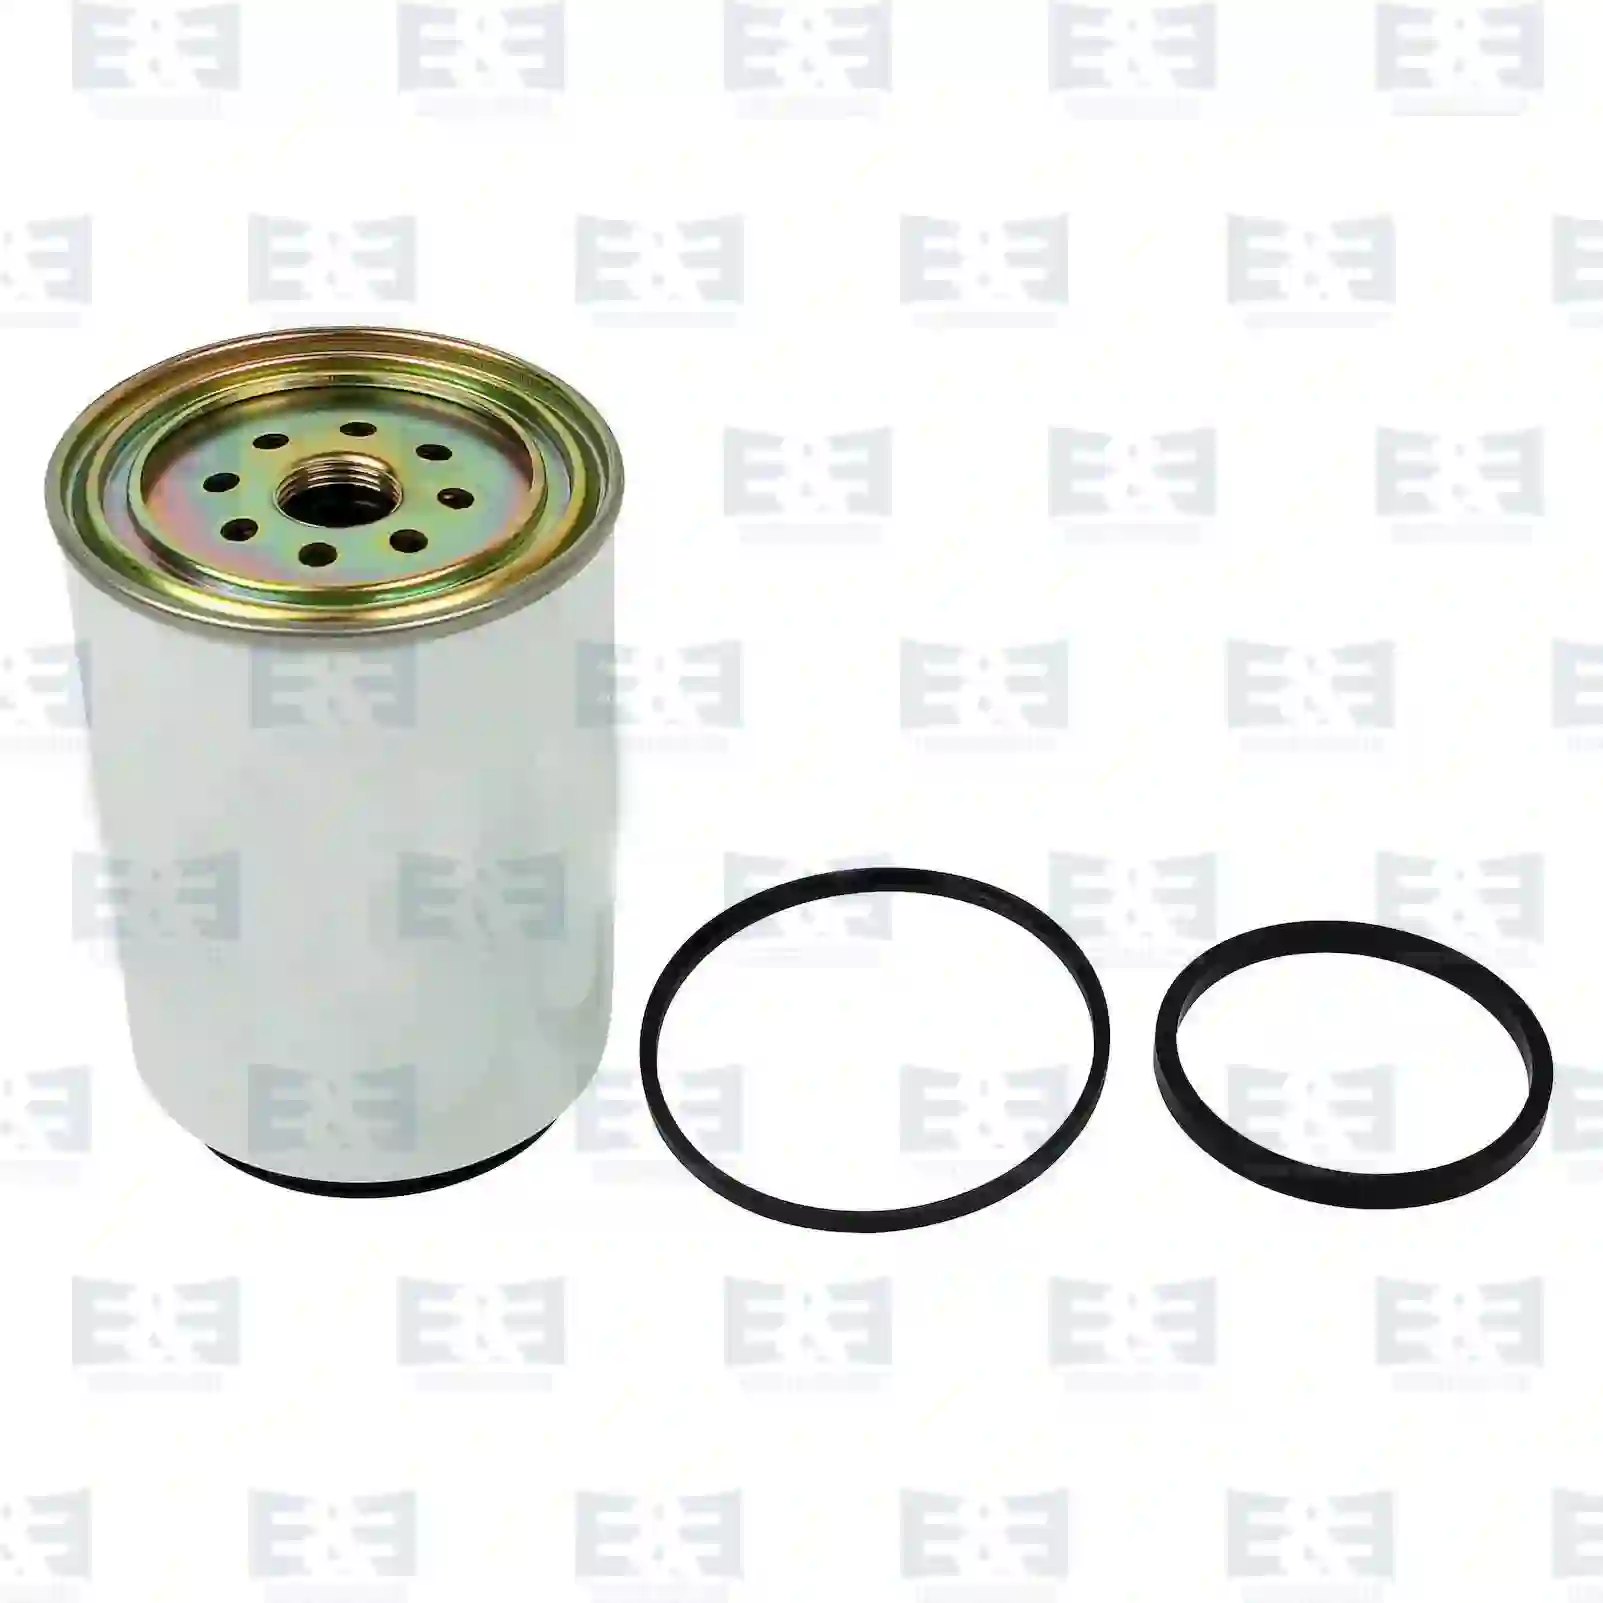 Fuel Filter, cpl. Fuel filter, water separator, EE No 2E2287836 ,  oem no:RAIR90P, 1685159C91, 430-8929, 0000687110, 0007733150, 0011342140, 0011342141, 1296851, 1355891, 1393640, 1529639, 45056112, 99707309813, 93297277, 03322877, 3322877, 23414E+024, 23414E0020, 23414E024, 8-97605118-1, 8-98081862-0, 5801403243, RE500186, RE502203, 51125030066, 6298164M1, 3754770002, 1393640, 0112142040, 0112142225, 0190142210, ST6007, 16403NY000, 20741196, 21140258, 3945966, 8159975, 81599755, 2R0127177C, ZG10153-0008 E&E Truck Spare Parts | Truck Spare Parts, Auotomotive Spare Parts